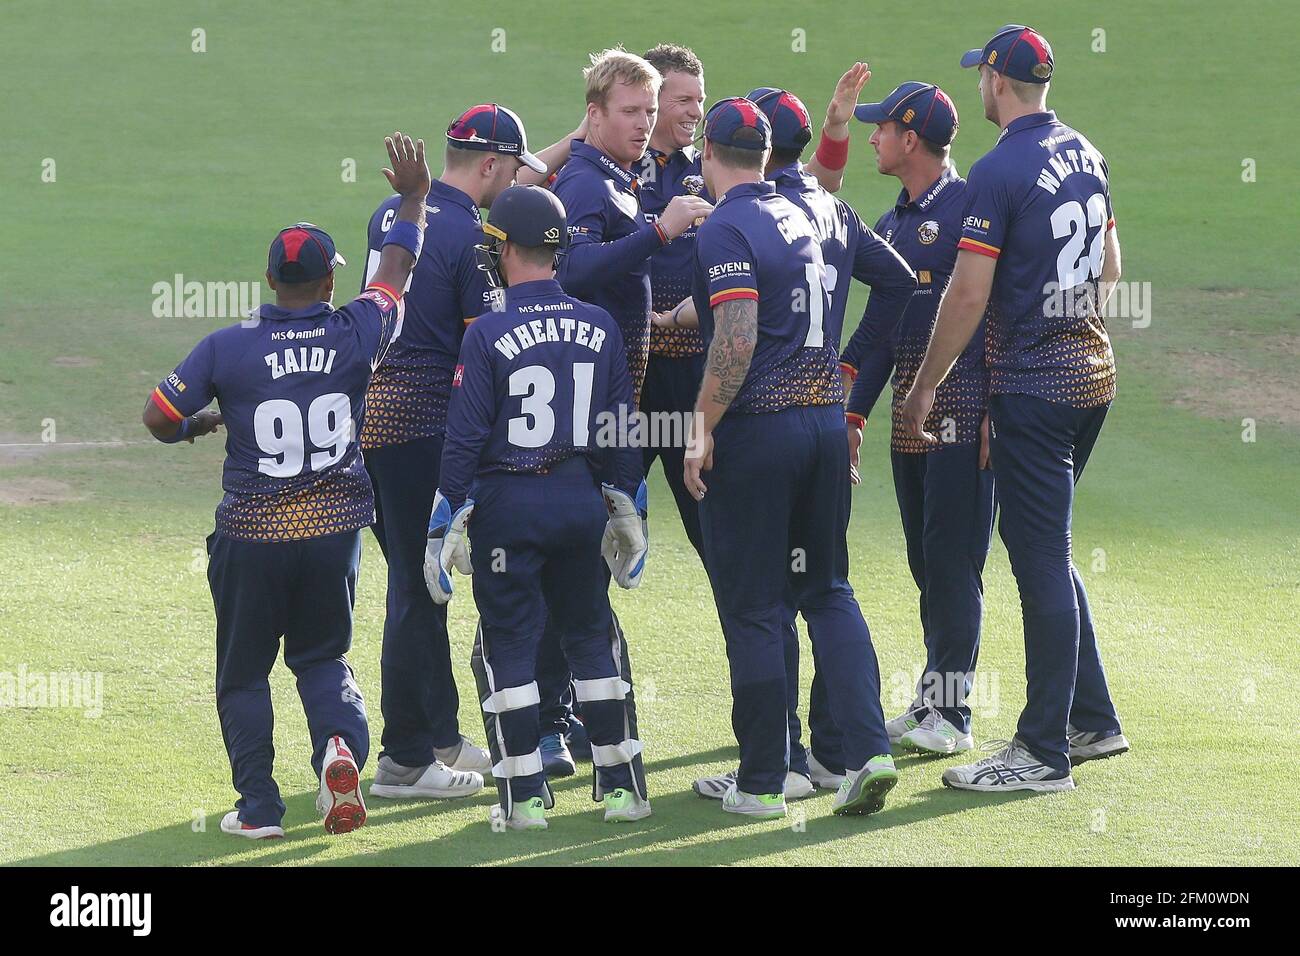 Simon Harmer of Essex celebrates with his team mates after taking the wicket of John Simpson during Middlesex vs Essex Eagles, Vitality Blast T20 Cric Stock Photo